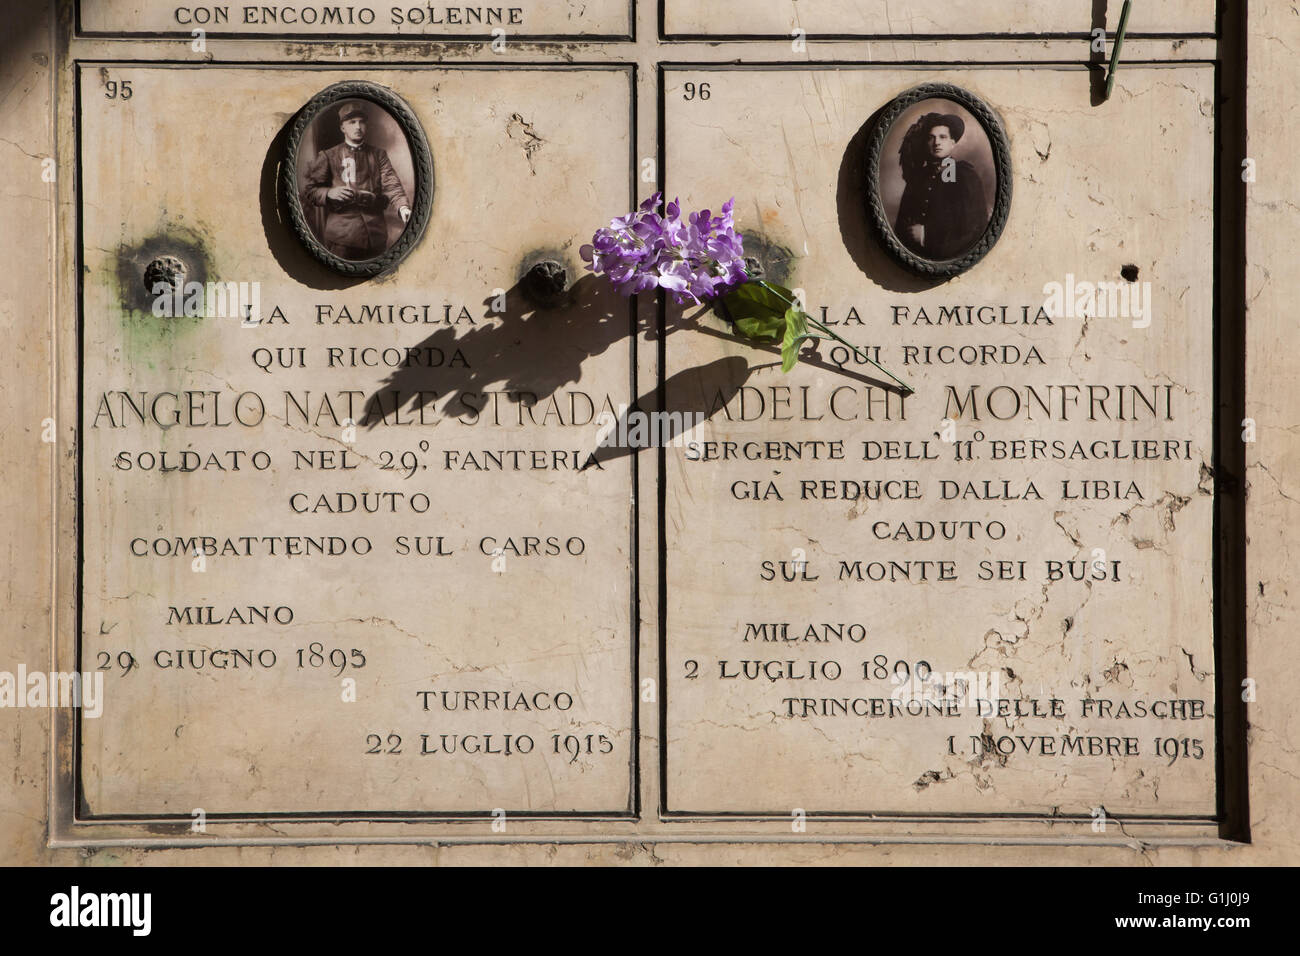 Commemorative plaques to Italian soldiers fallen during World War I at the Monumental Cemetery (Cimitero Monumentale di Milano) in Milan, Lombardy, Italy. Cenotaph to Angelo Natale Strada fallen at Turraco on July 22, 1915, and to Adelchi Monfrini fallen at Tricerone delle Frasche on November 1, 1915. Stock Photo